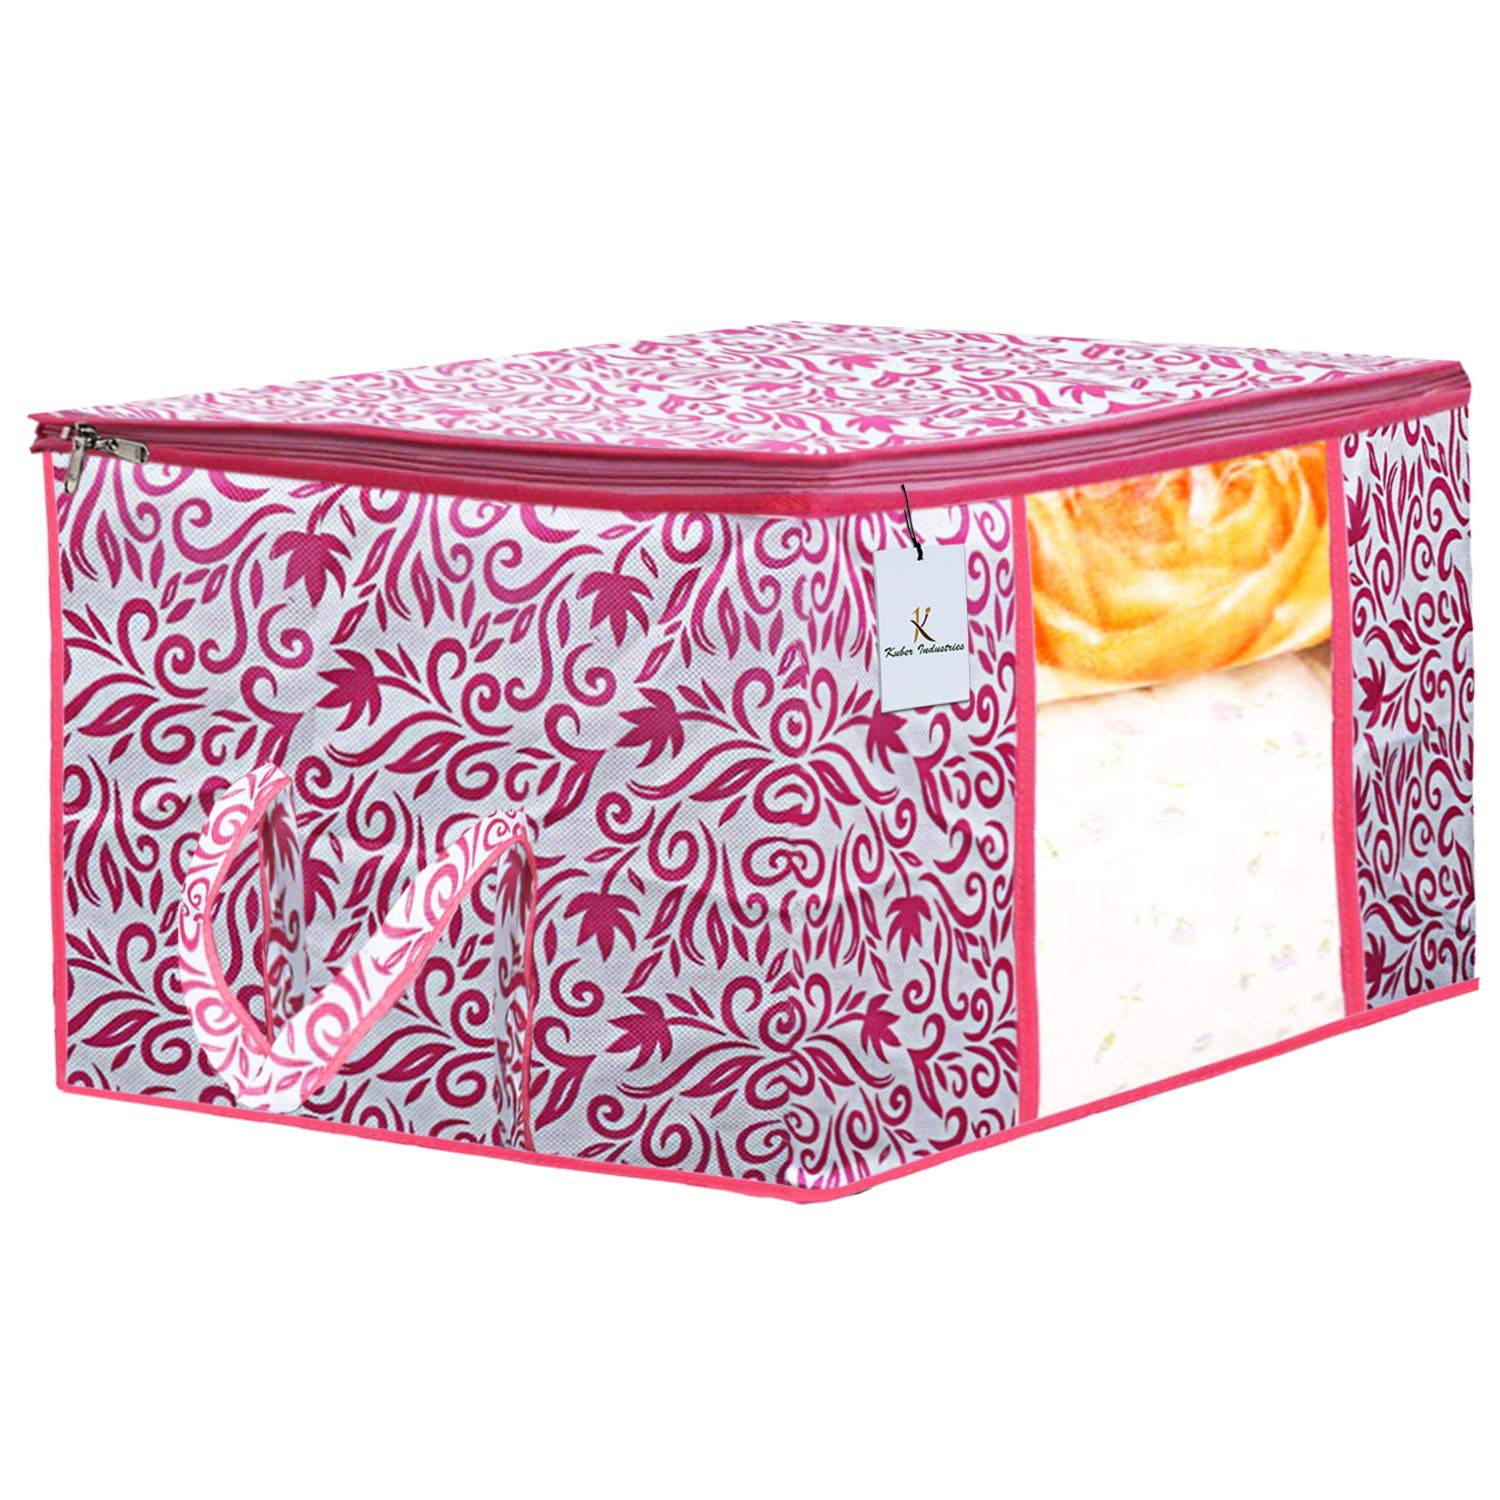 Kuber Industries Leaf Design Non Woven Fabric Underbed Storage Bag,Cloth Organiser,Blanket Cover with Transparent Window, Red & Pink -CTKTC41043